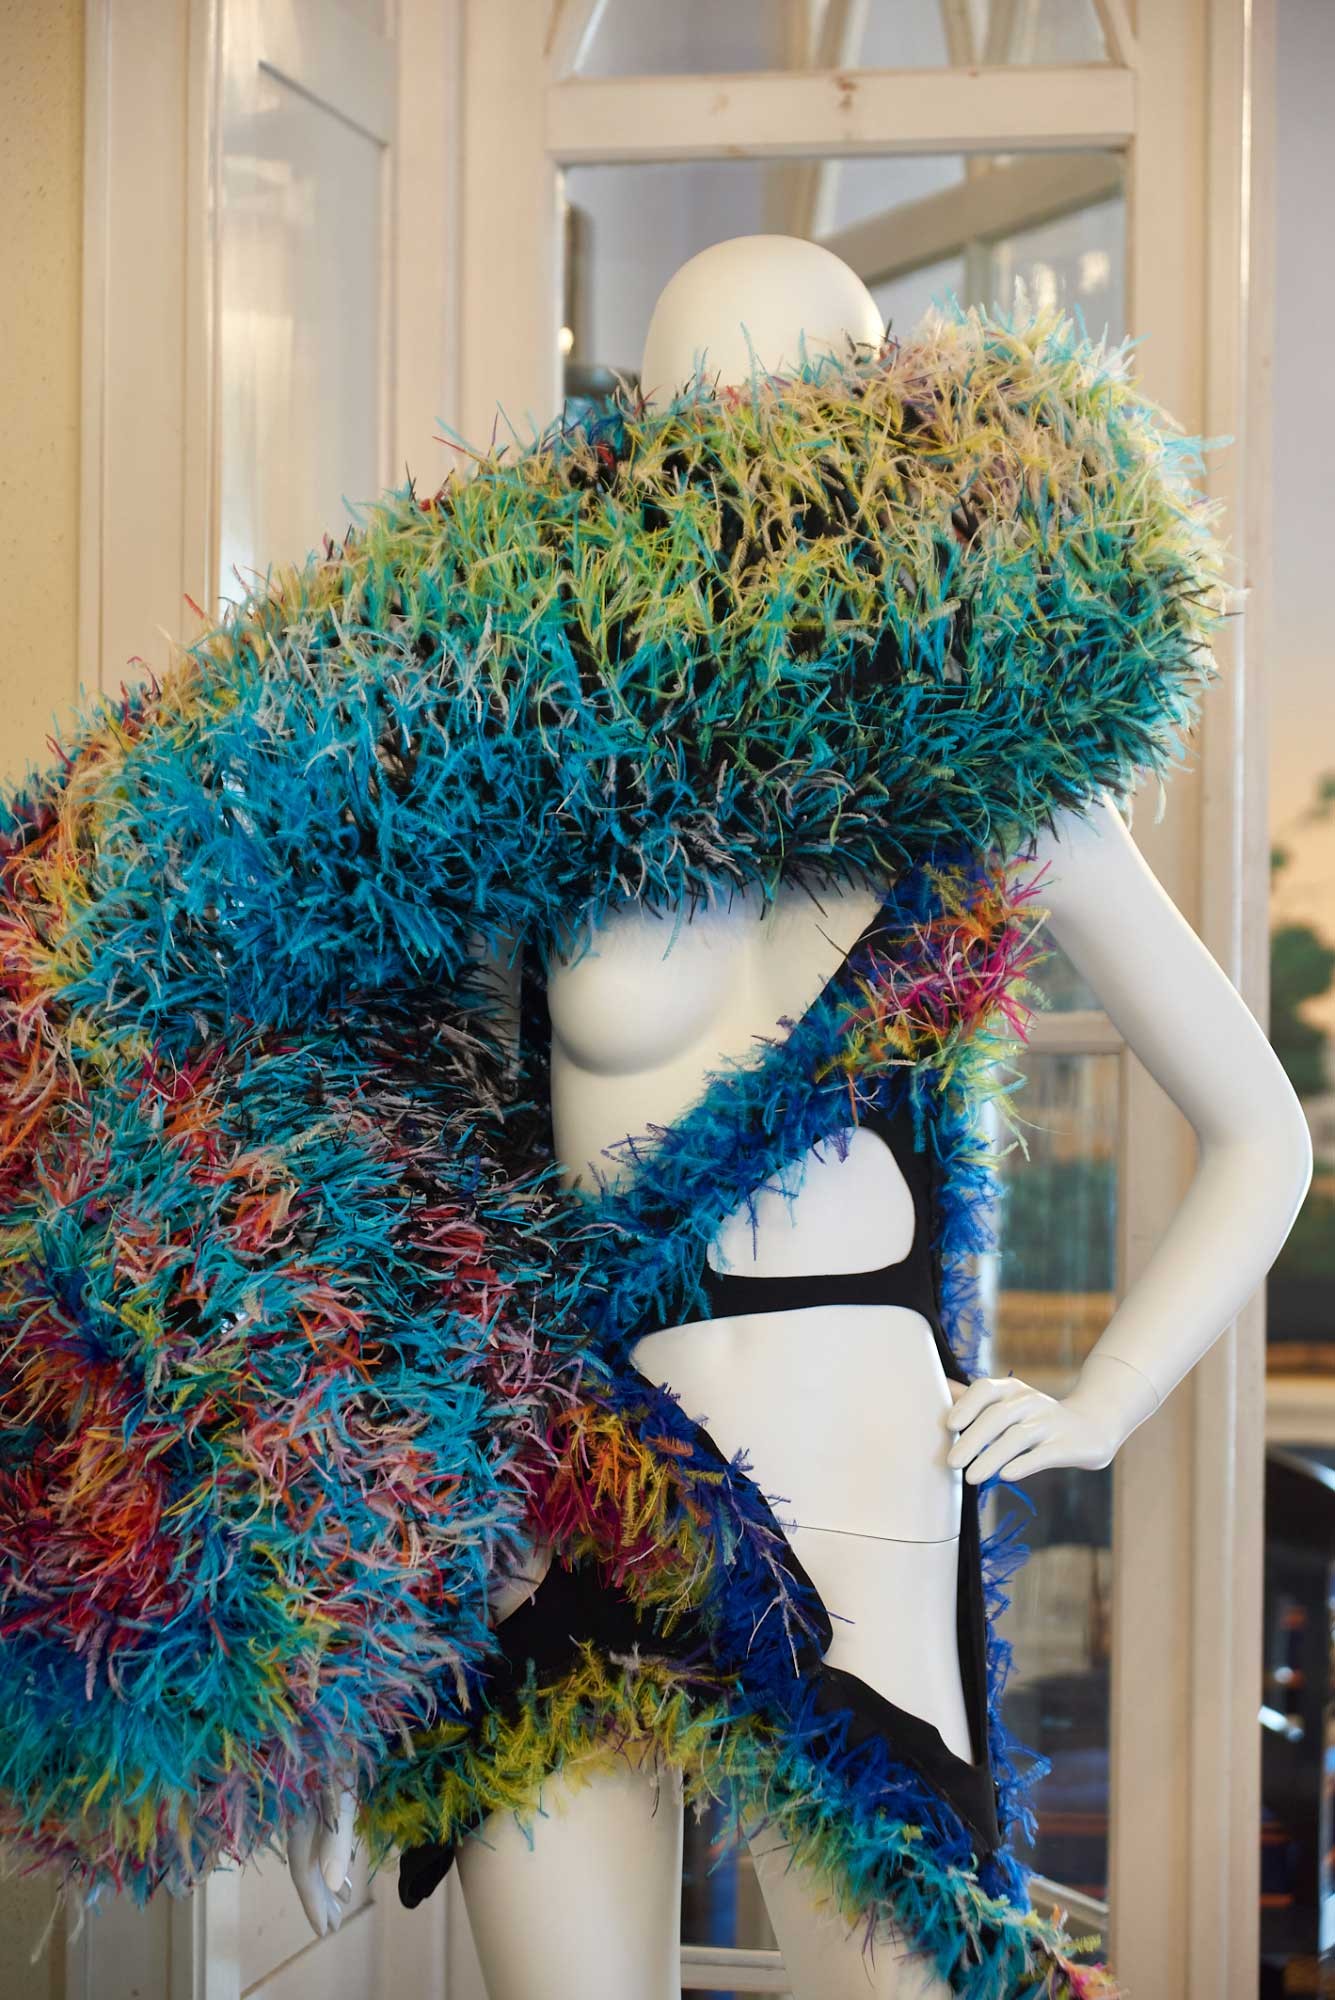 A mannequin around whose neck and body is wrapped a colorful object.